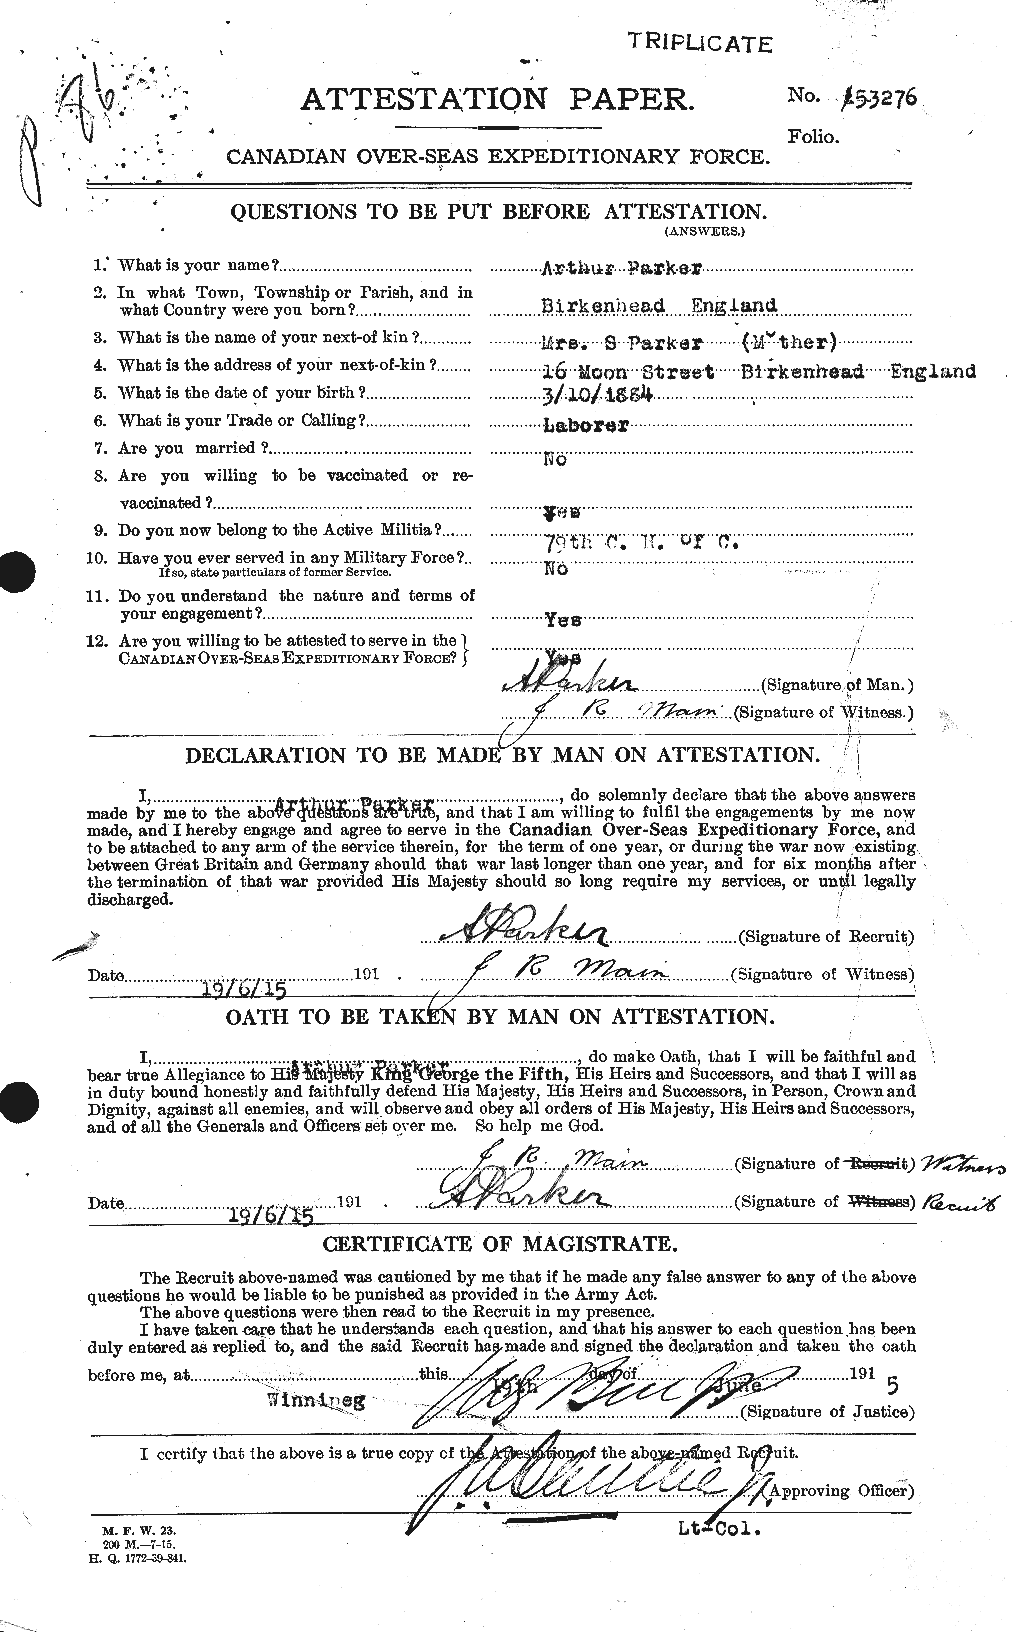 Personnel Records of the First World War - CEF 565015a